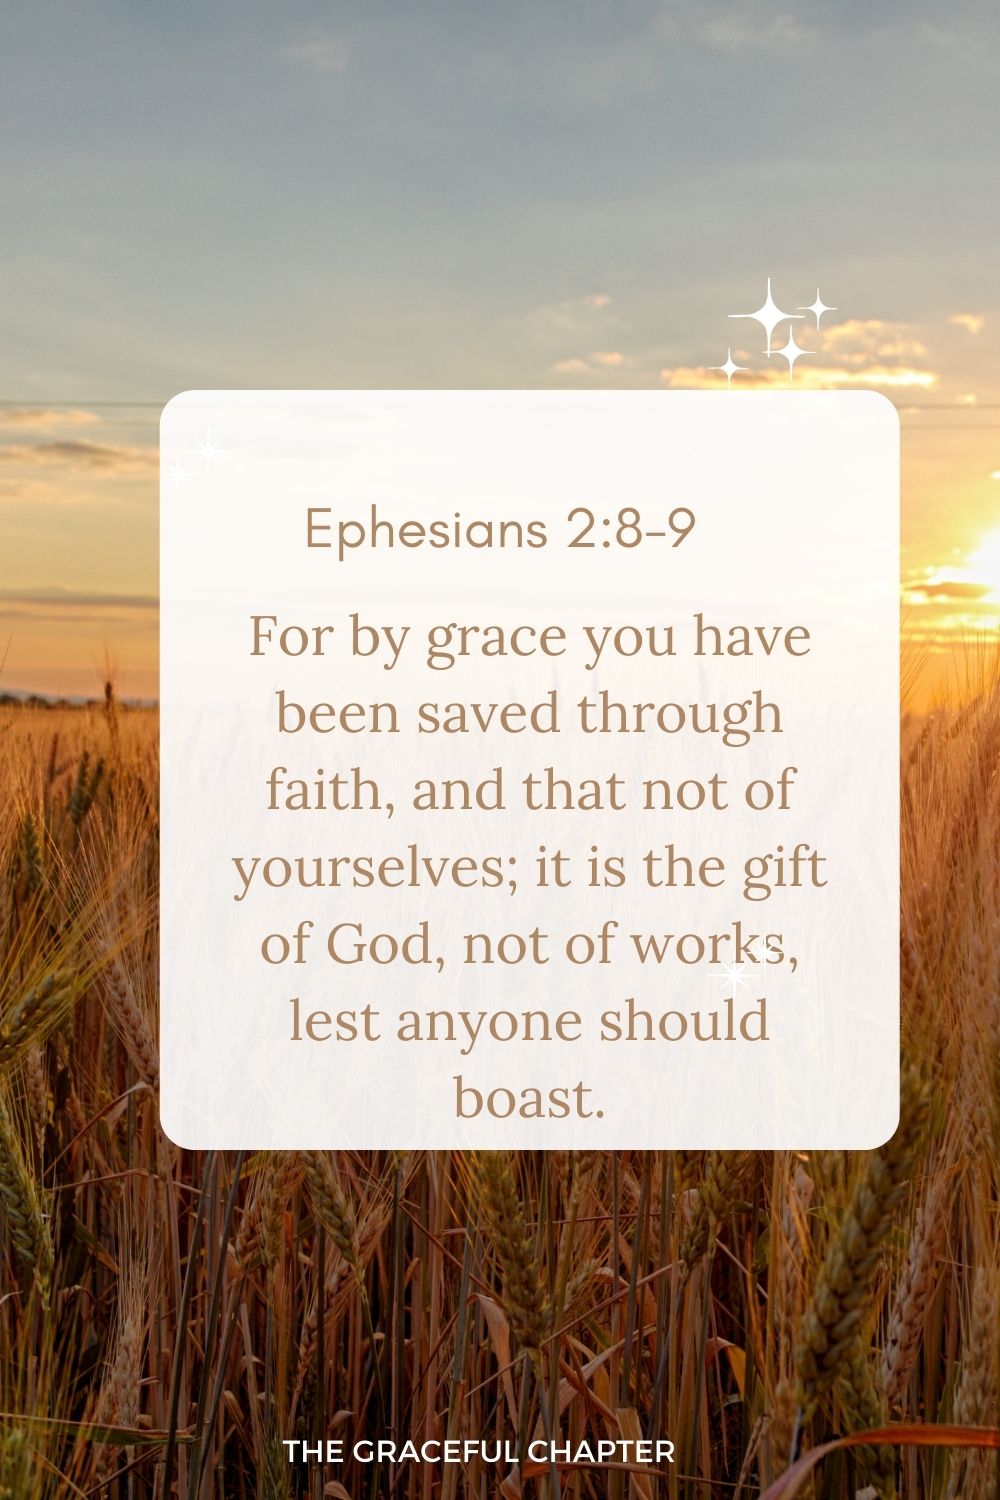 For by grace you have been saved through faith, and that not of yourselves; it is the gift of God, not of works, lest anyone should boast. Ephesians 2:8-9